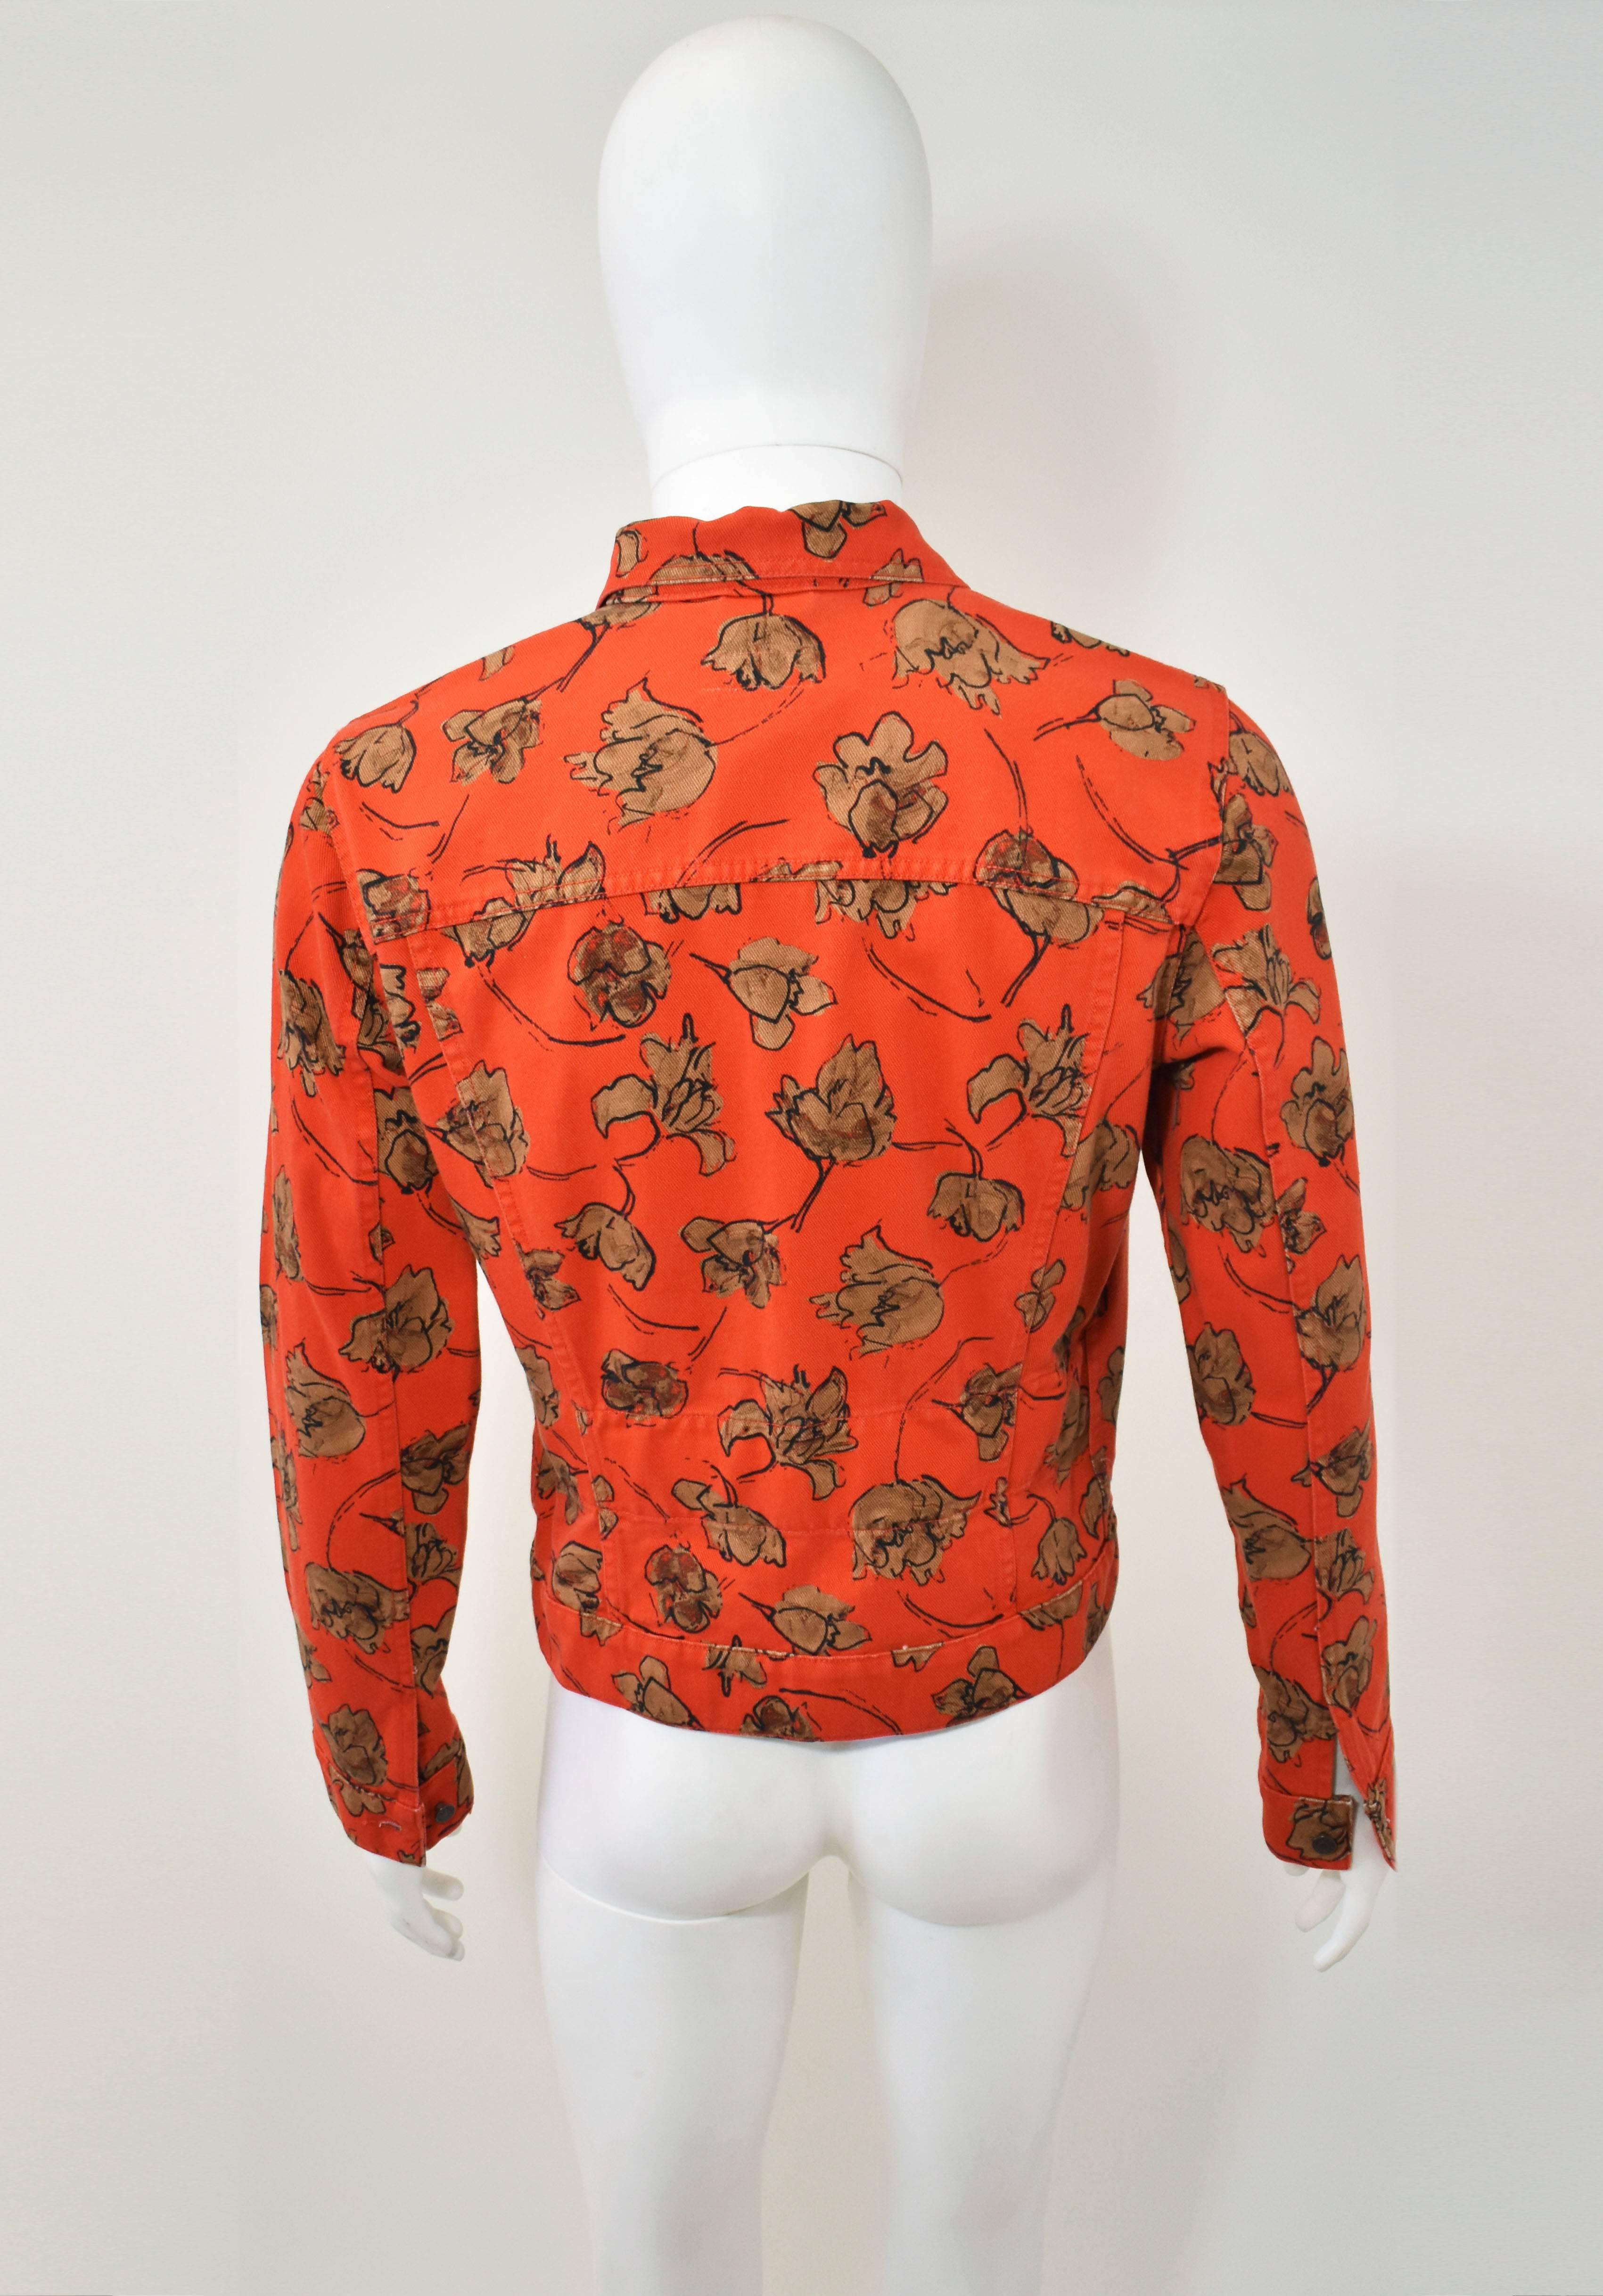 Dries Van Noten Orange Floral Print Denim Jacket with Concealed Belt and Waxed C In Excellent Condition For Sale In London, GB